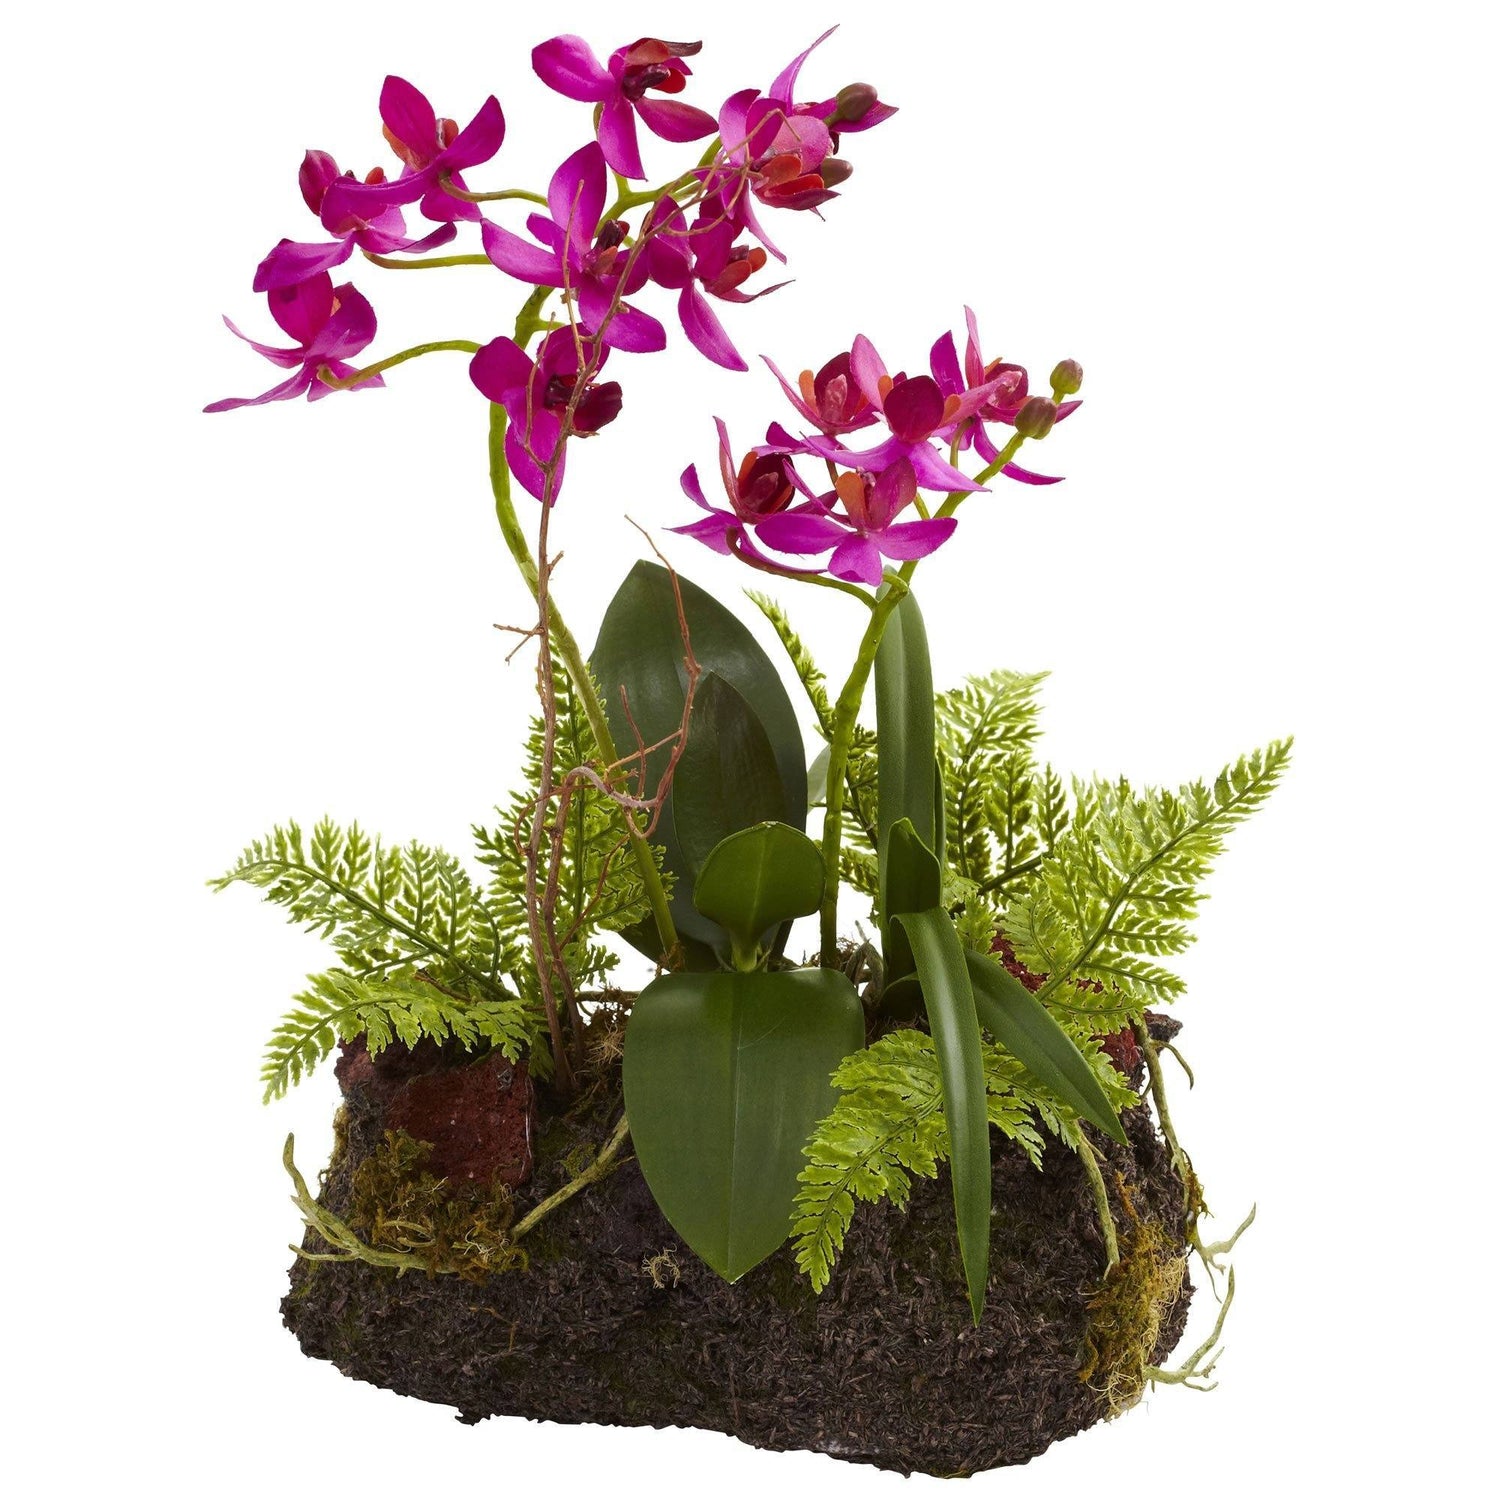 Orchid Island (Set of 2)